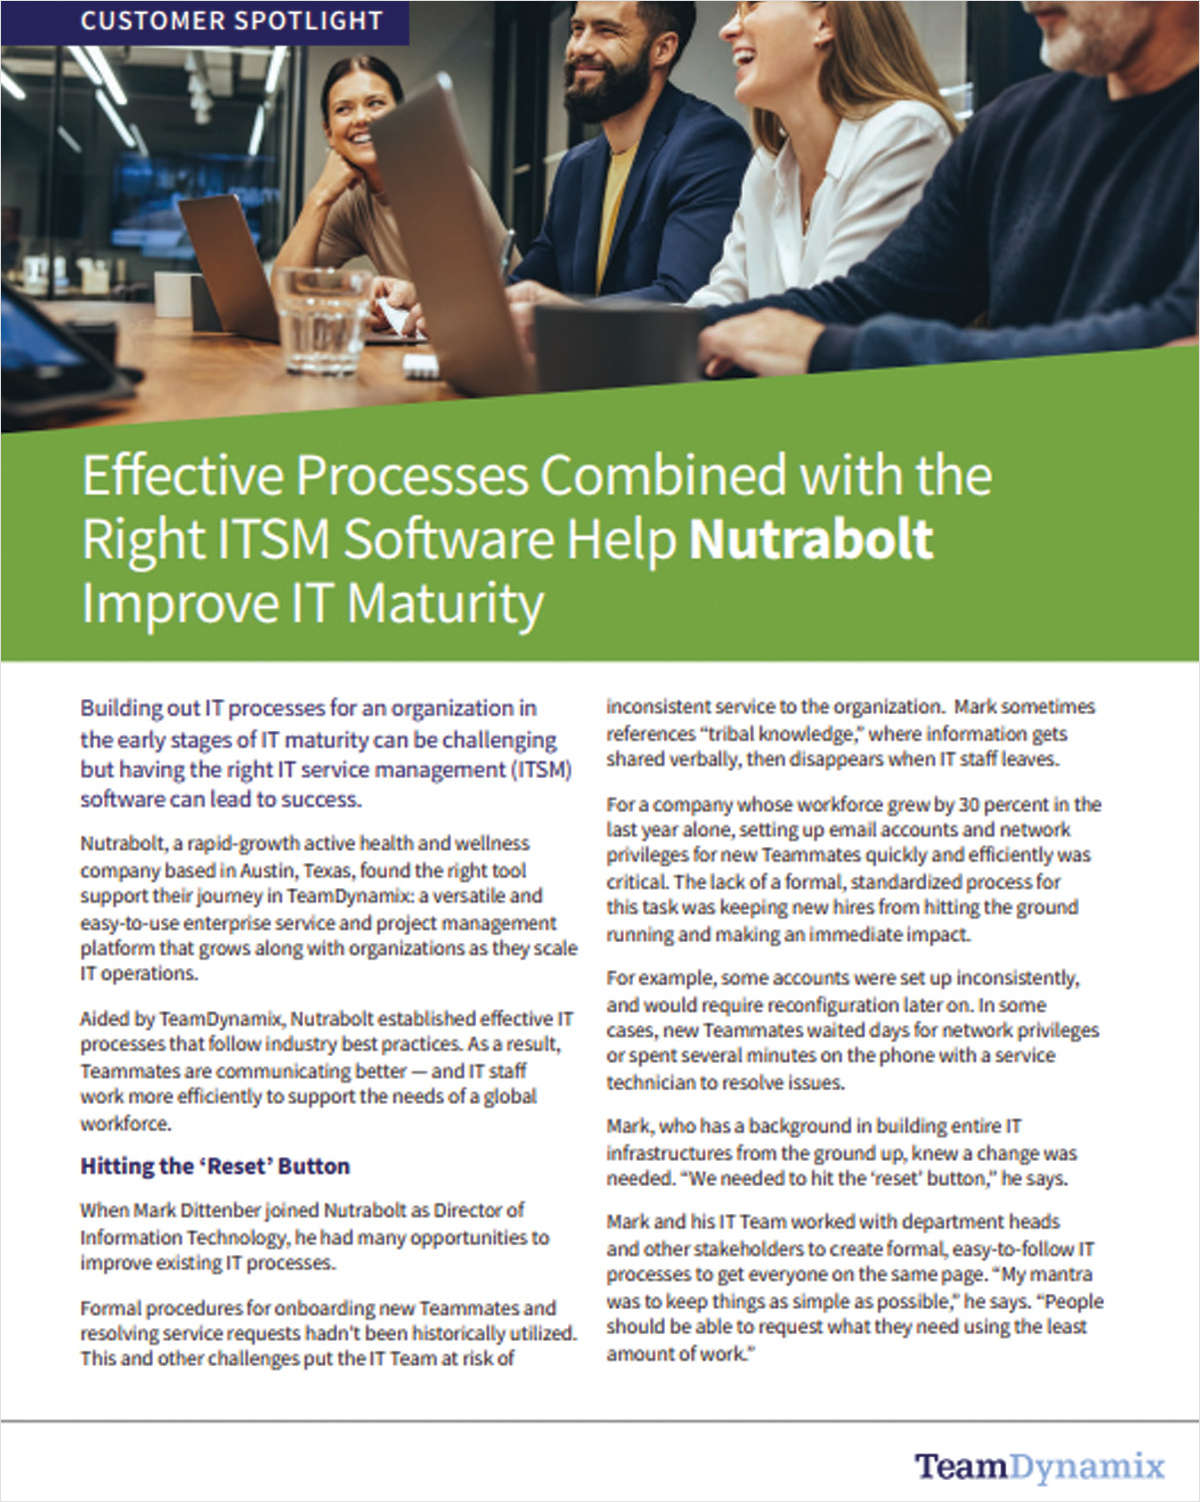 Nutrabolt Achieves Faster, Easier IT Service Delivery with No-Code Automation